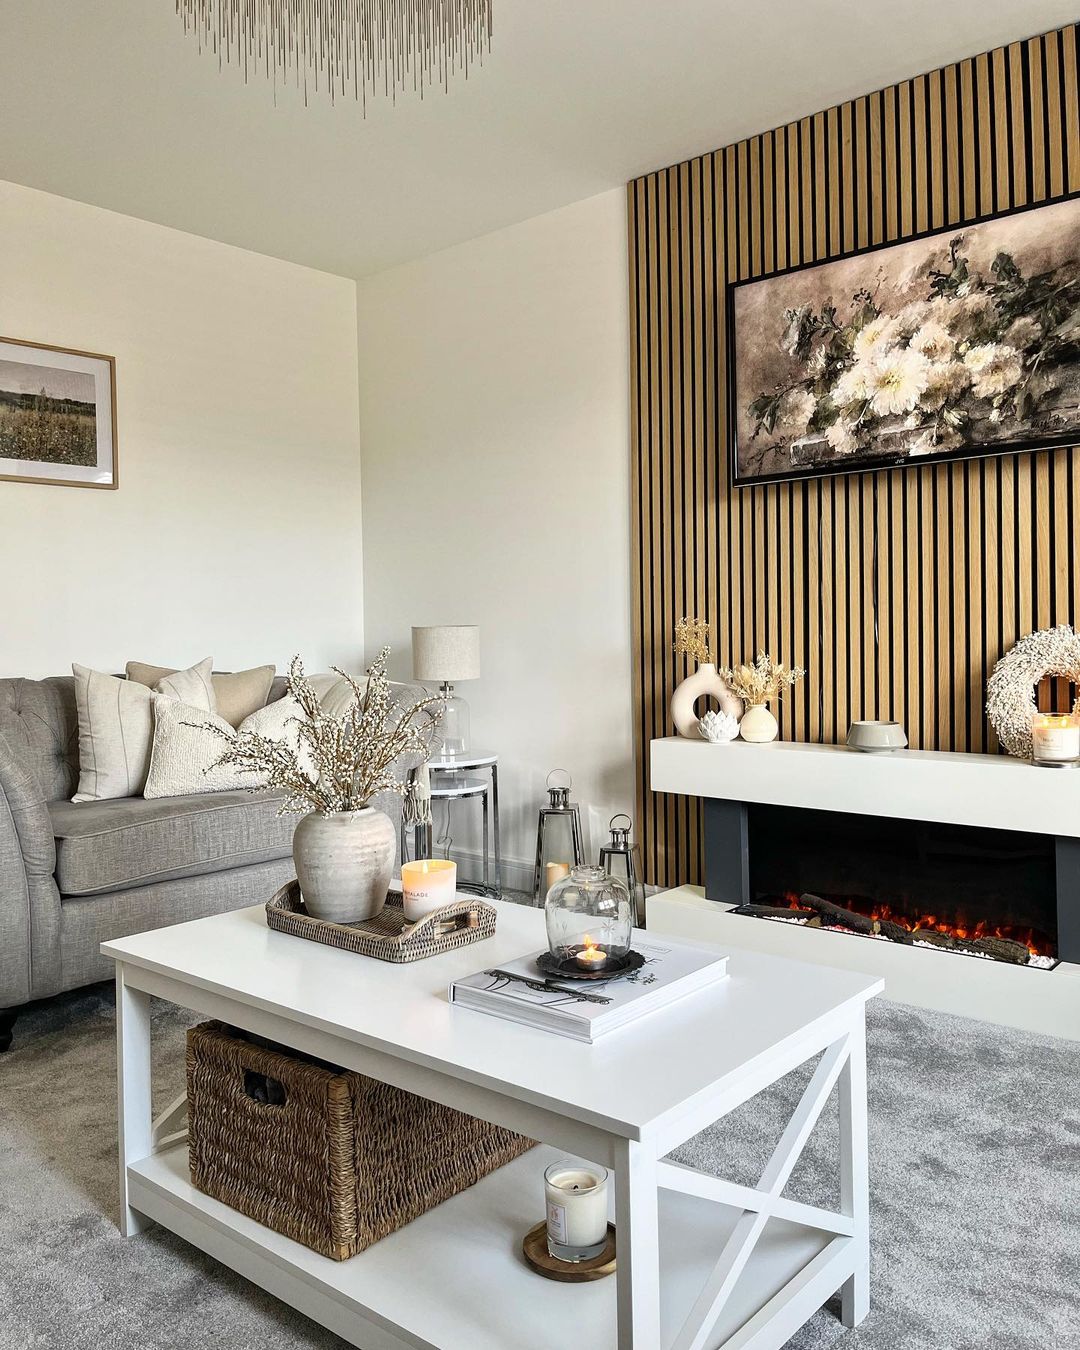 Sleek and Contemporary with Textural Accents